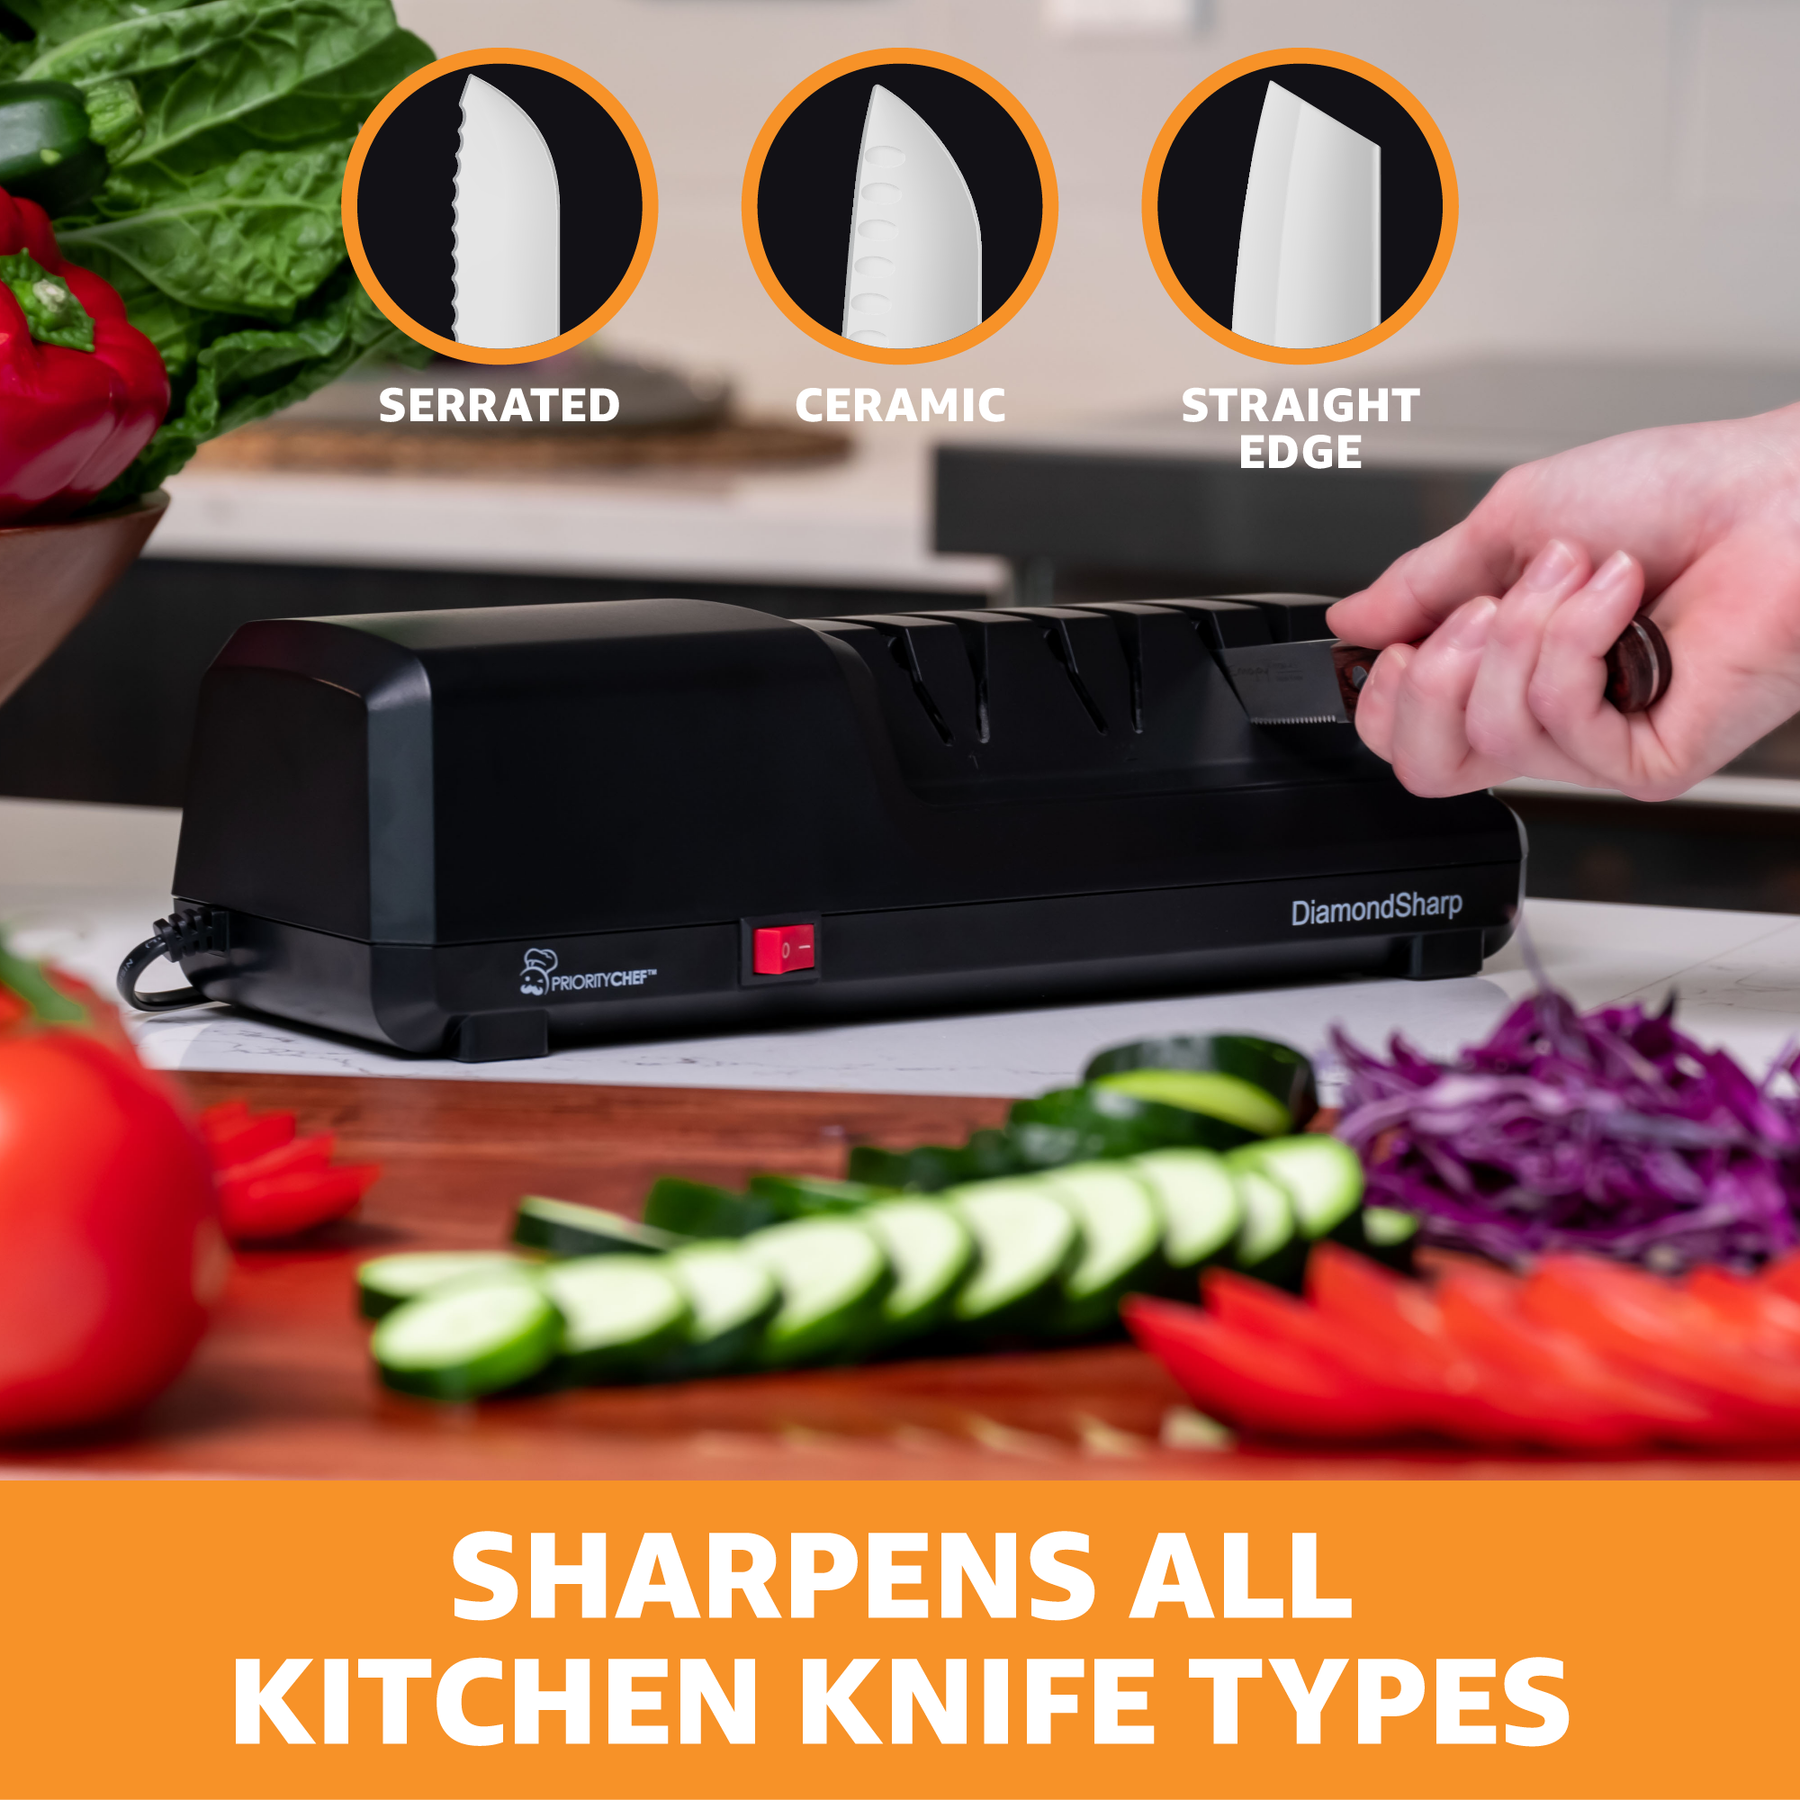 PriorityChef Kitchen Knife Sharpener Tool, Heavy Duty 4 Stage Knife  Sharpening Kit and Scissor Sharpener, Repair, Polish and Sharpen your  Kitchen